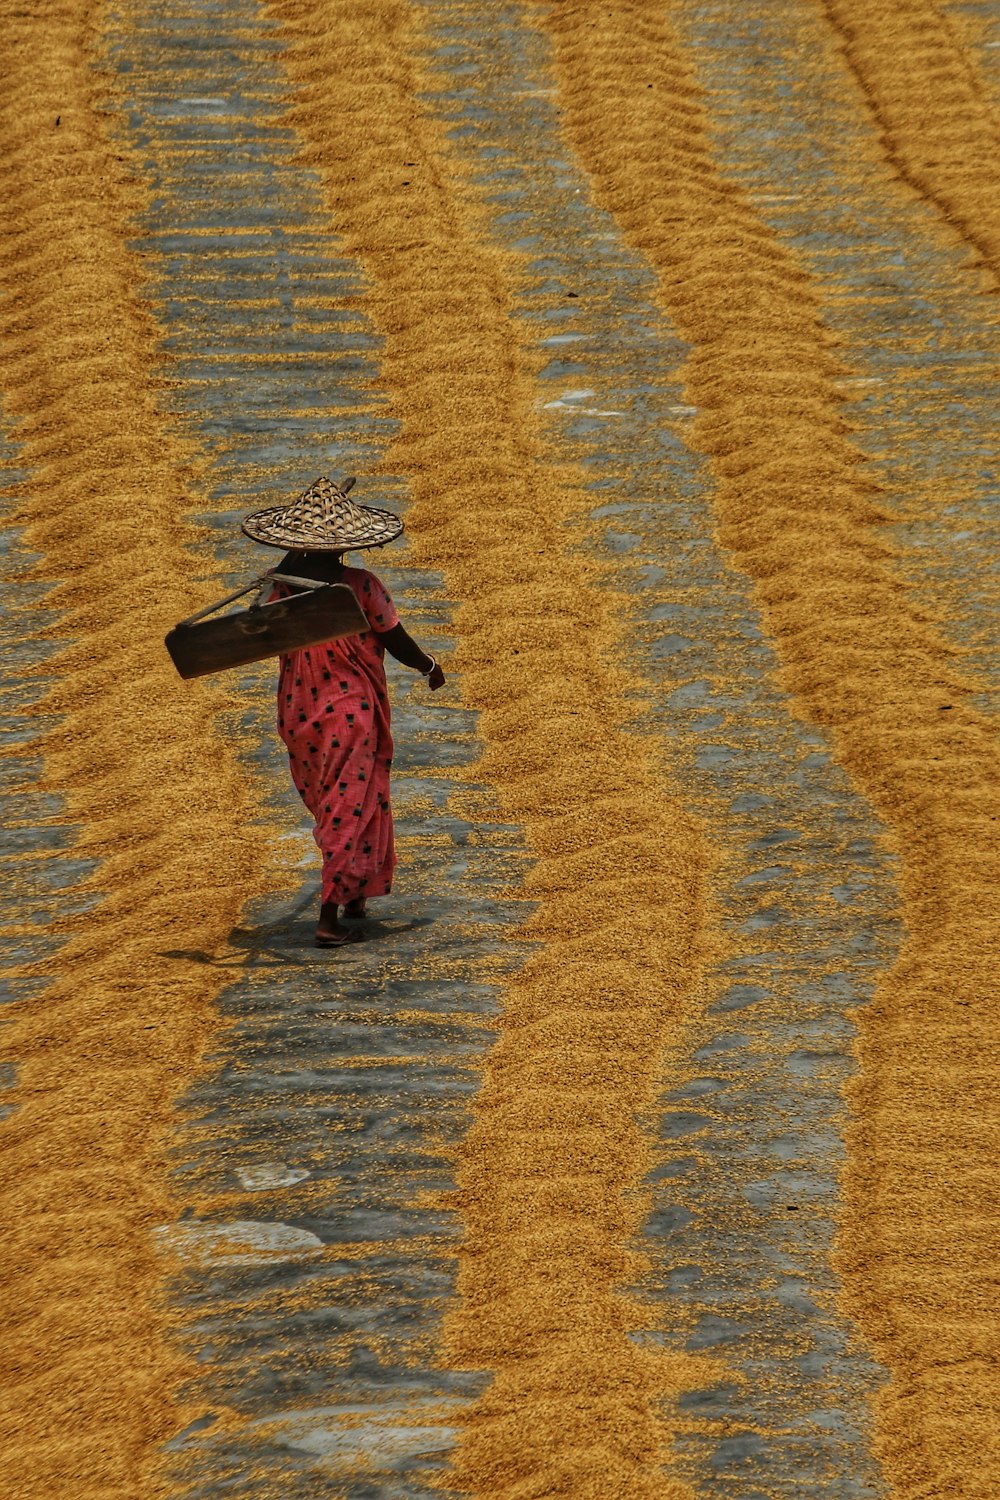 a woman walking across a field with a hat on her head